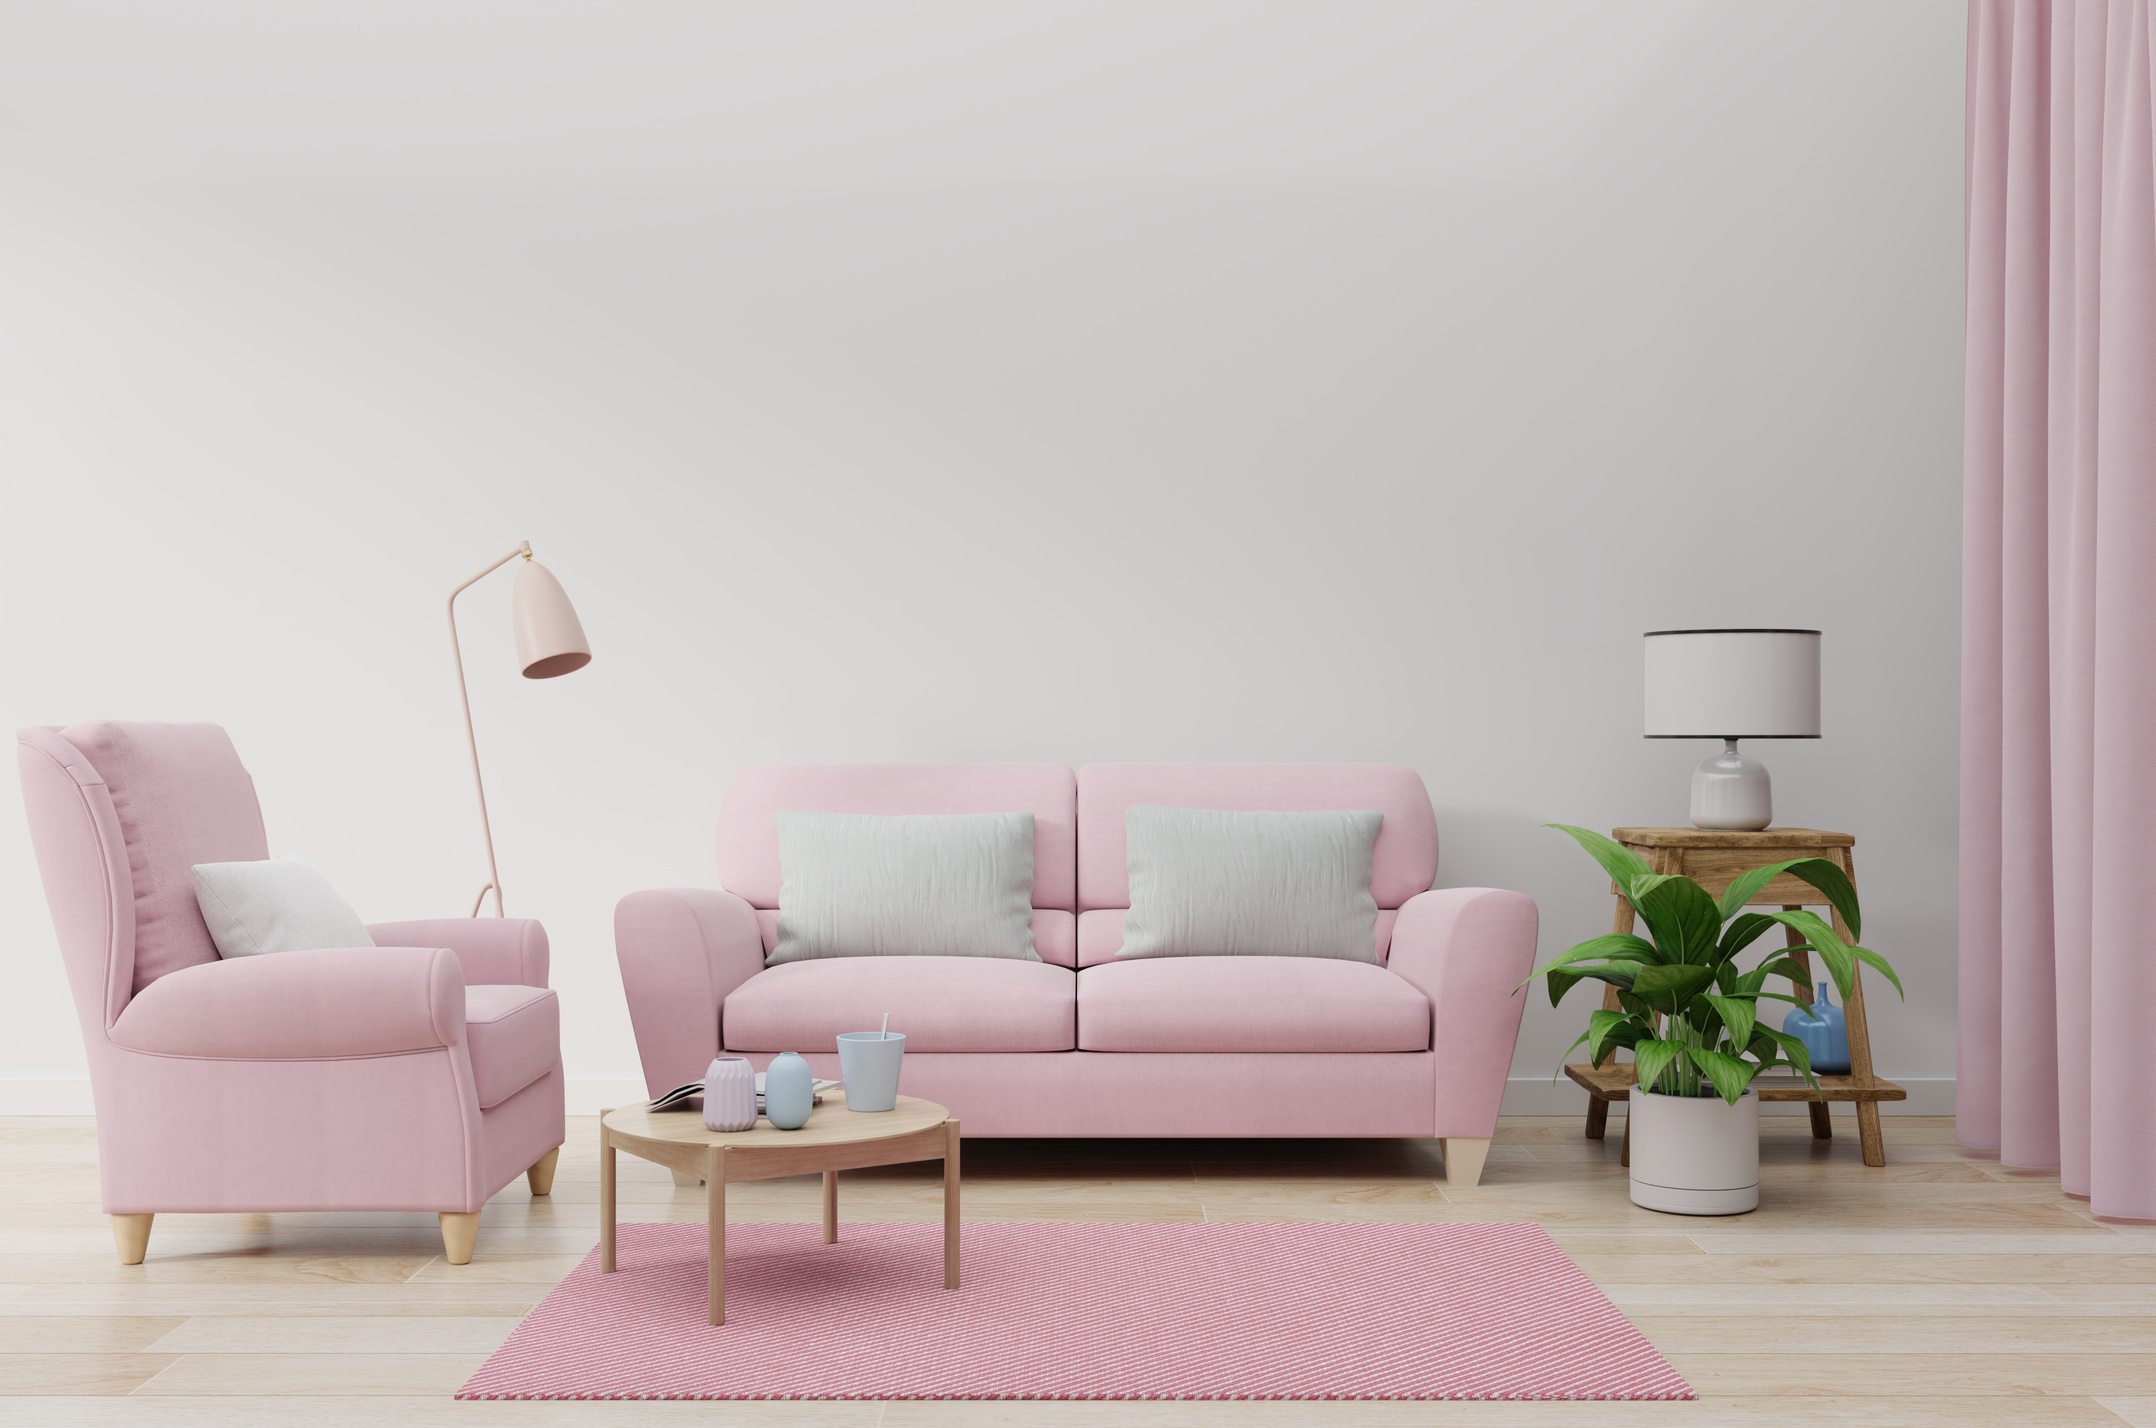 Living Room in Pink Theme